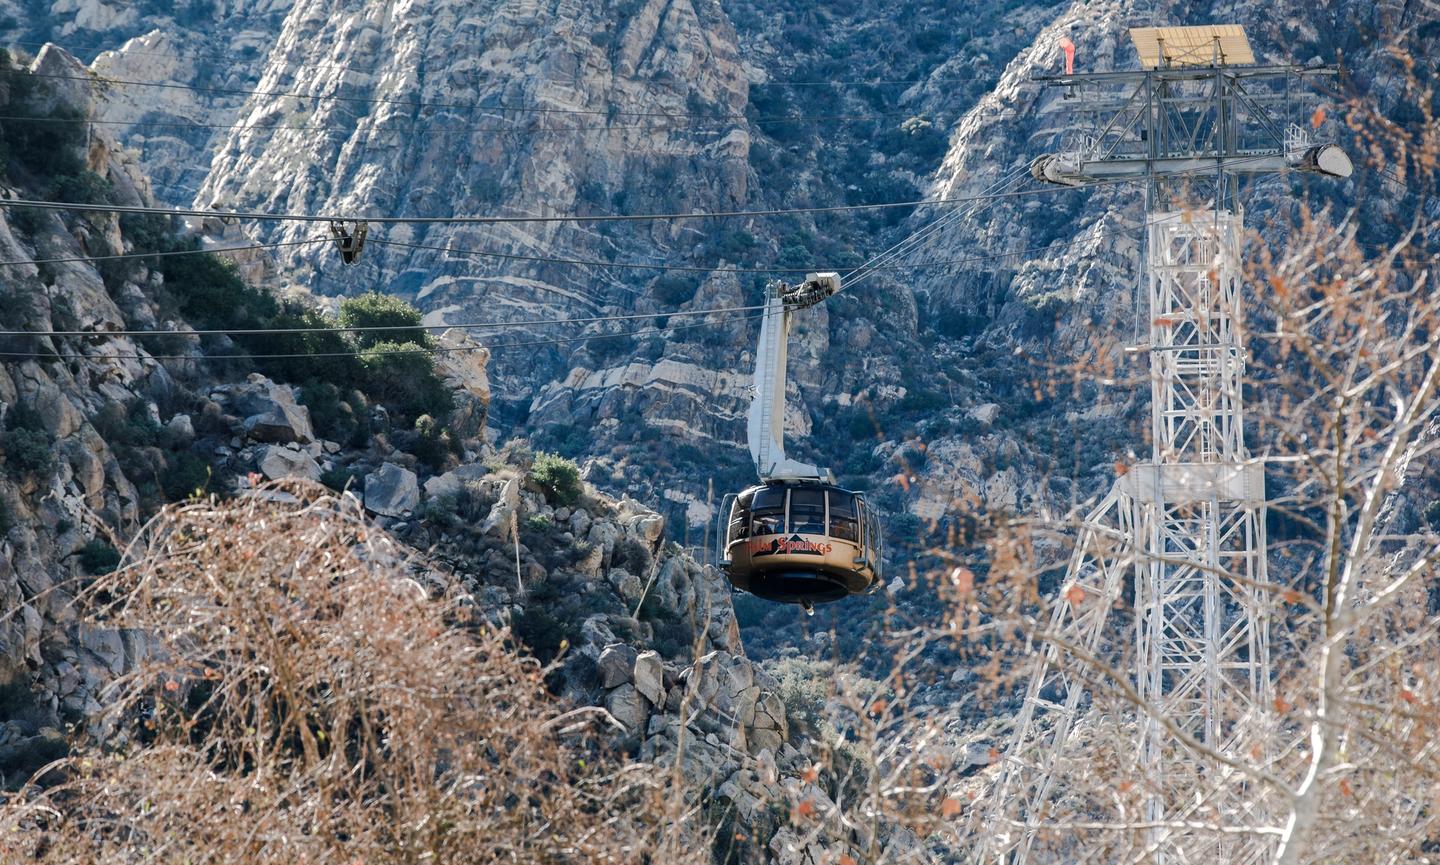 The Palm Springs Aerial Tramway makes an eight-minute ascent from the desert floor to a peak mountain station.